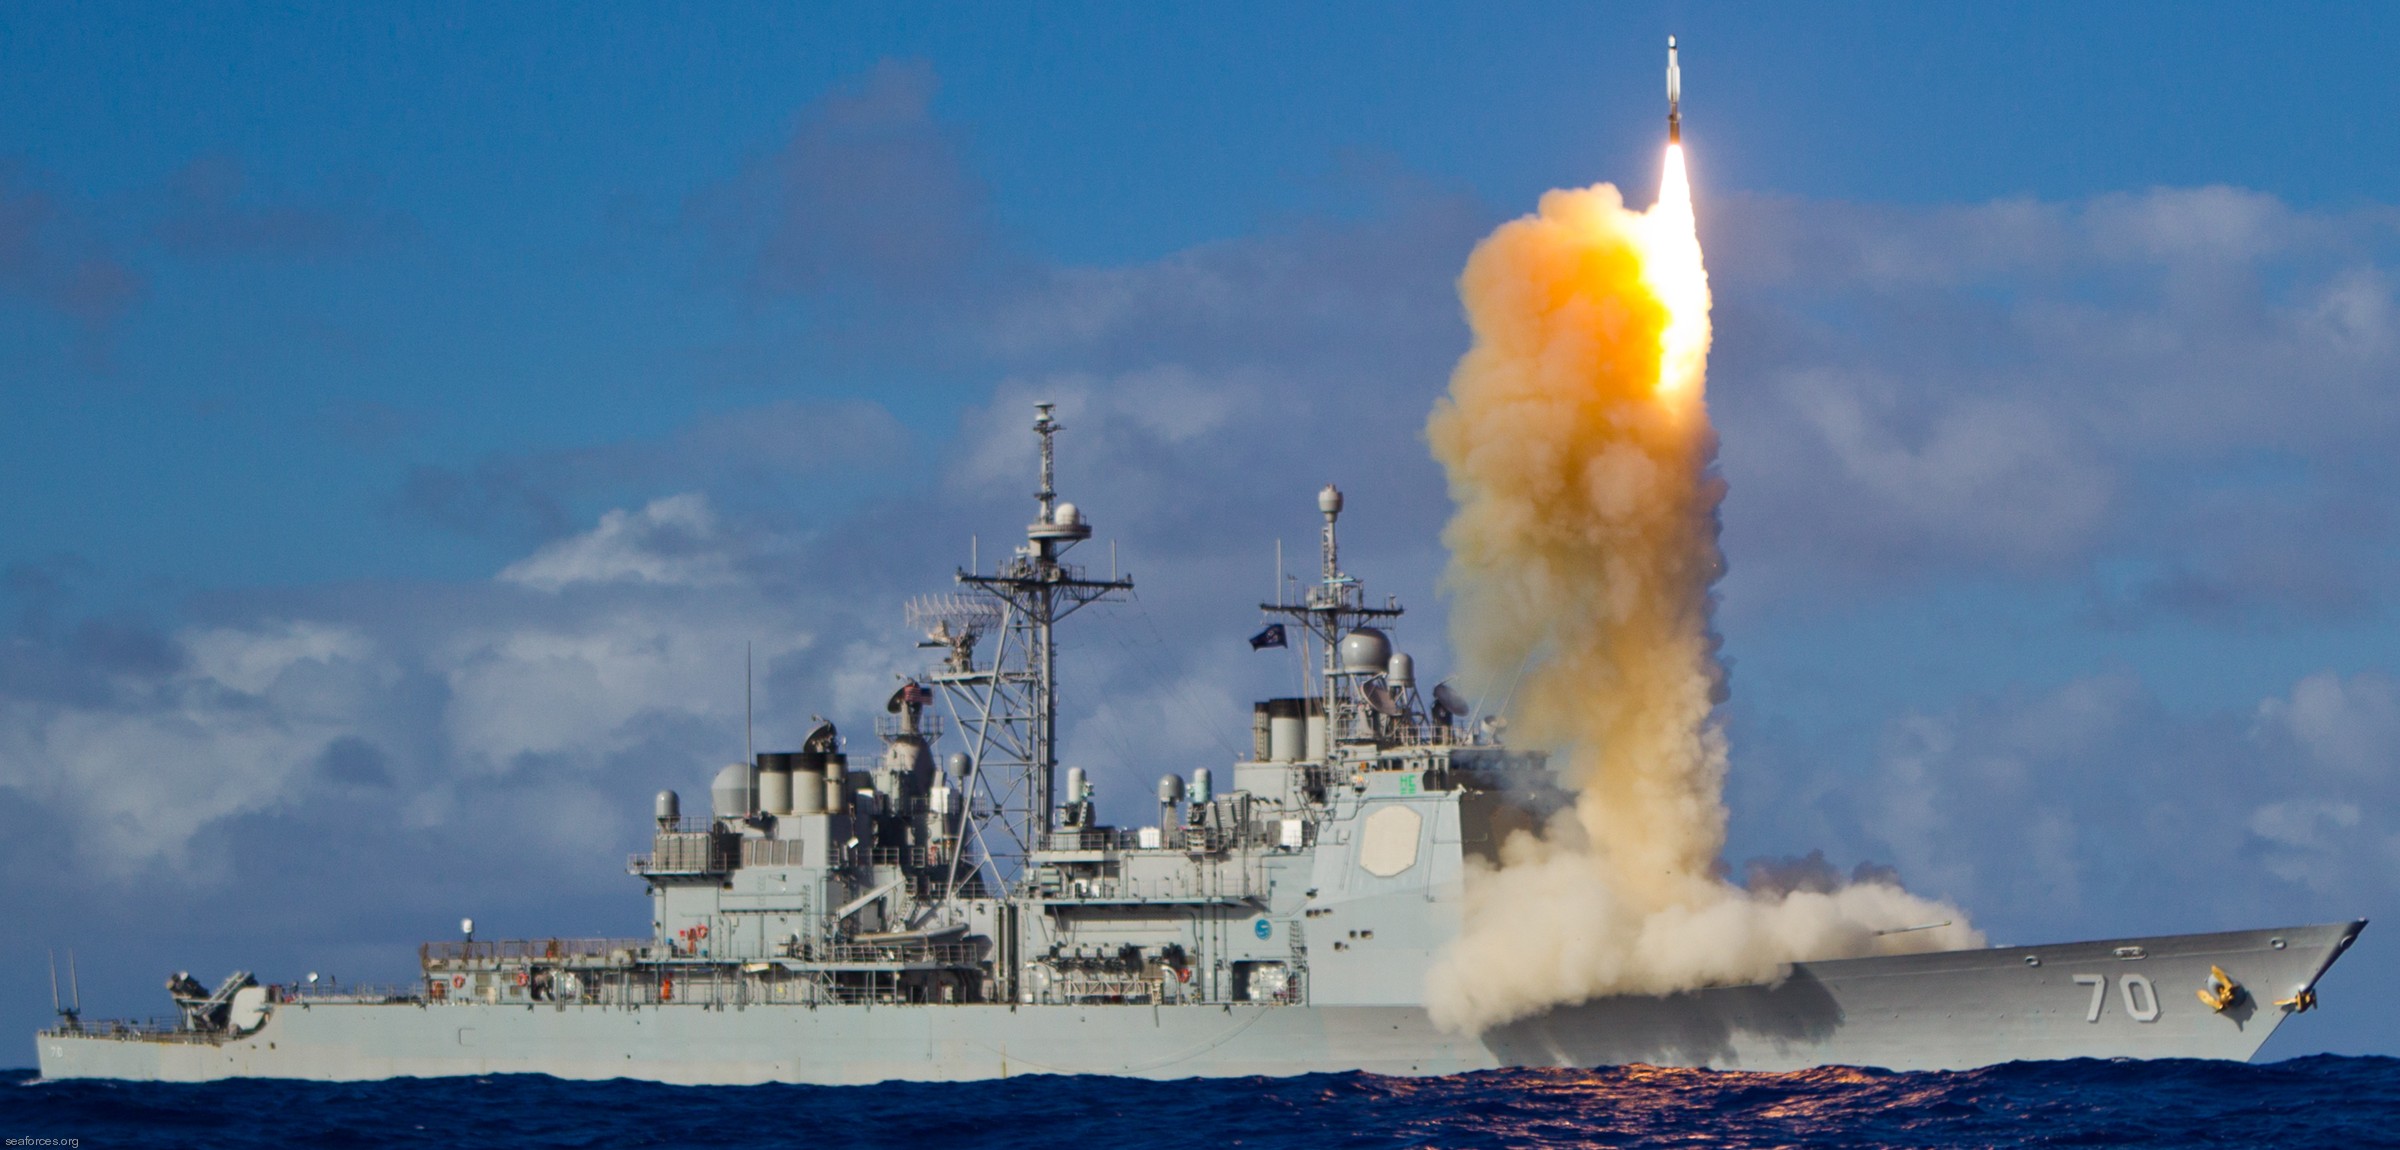 cg-70 uss lake erie ticonderoga class guided missile cruiser navy 27 standard missile sm-3 launch